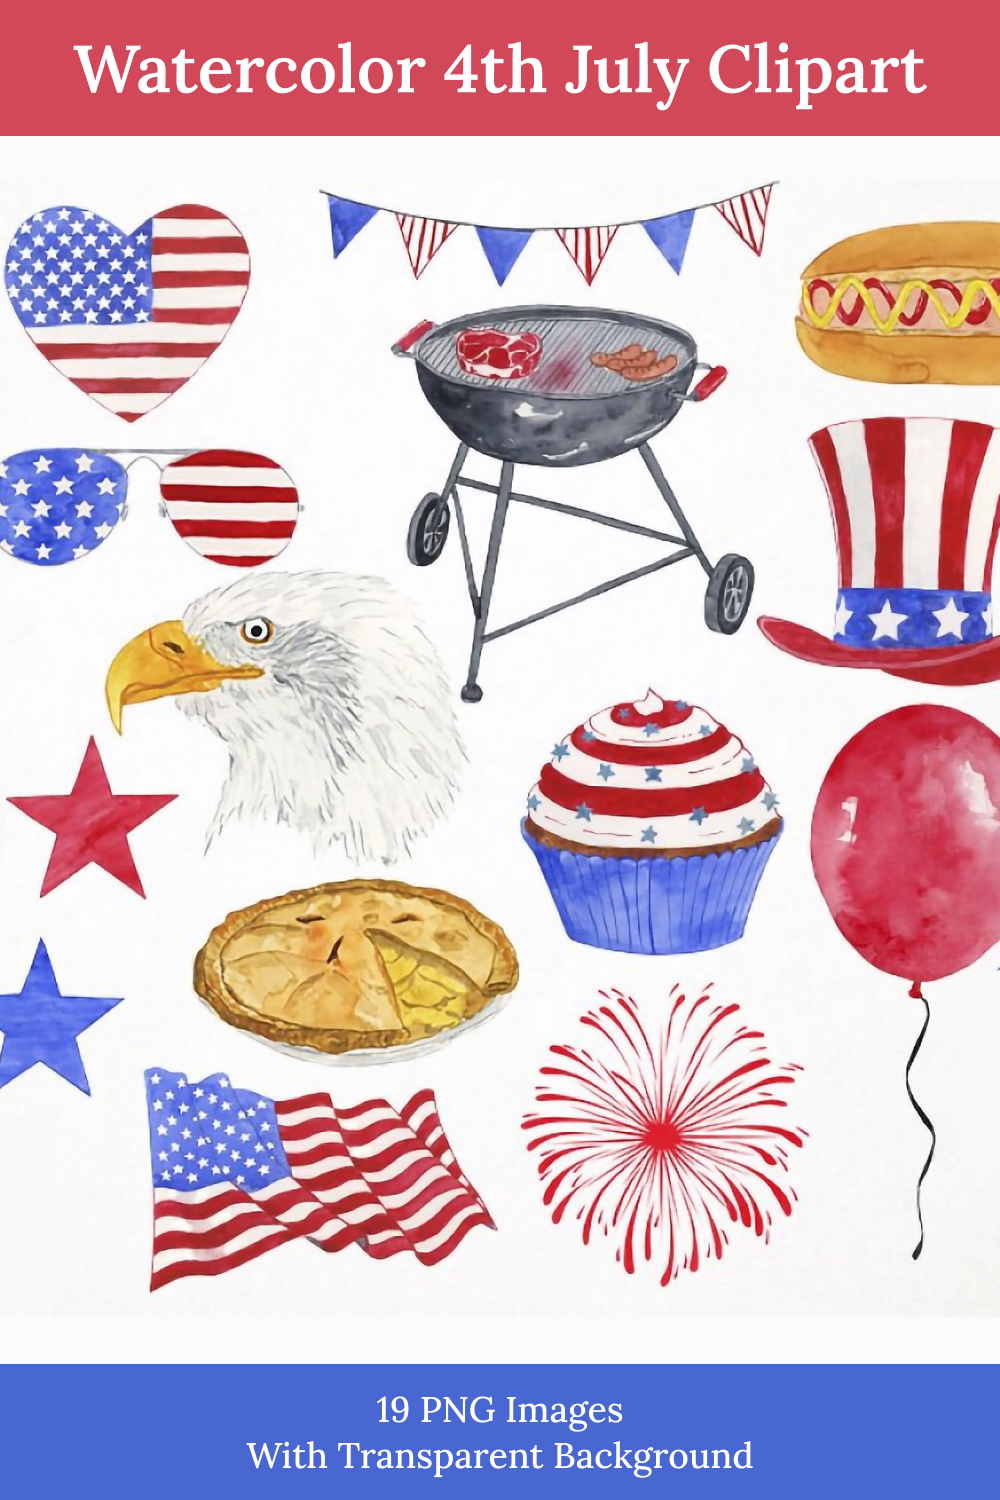 Watercolor 4th july clipart of pinterest.